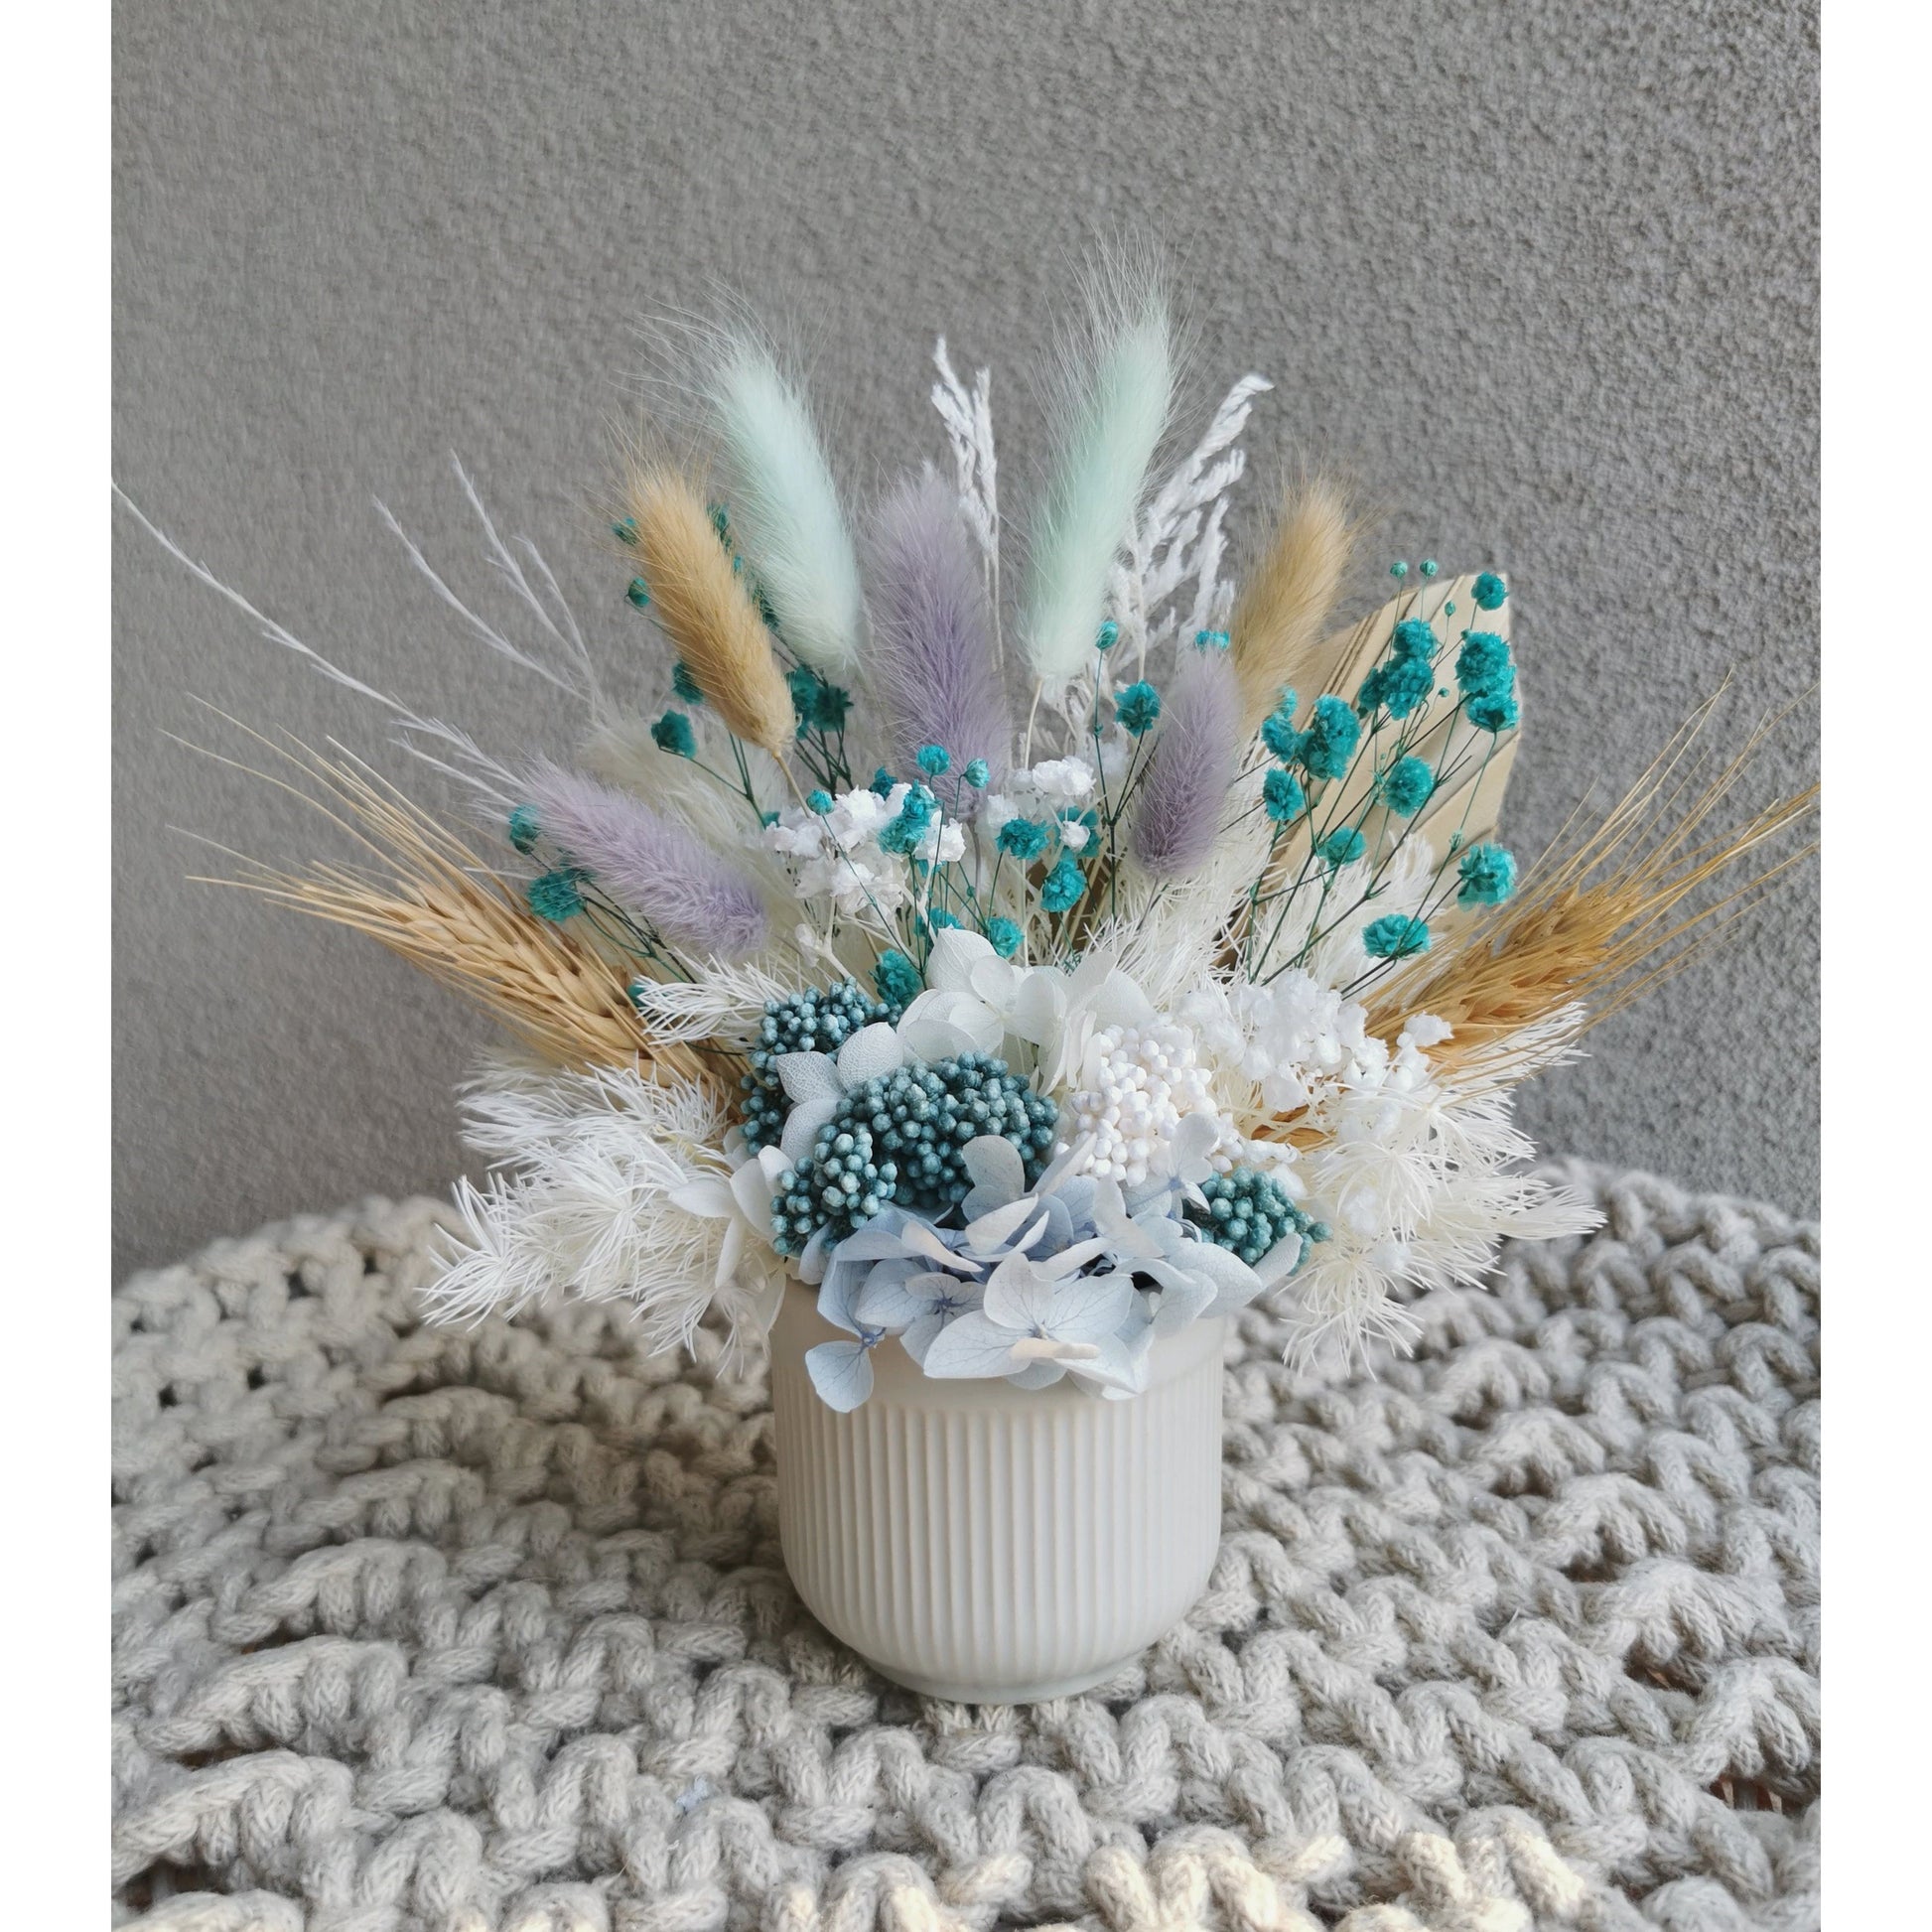 Natural, white, blue & purple dried & preserved mini flower arrangement in ribbed pot. Photo shows arrangement sitting on a tray against a blank wall